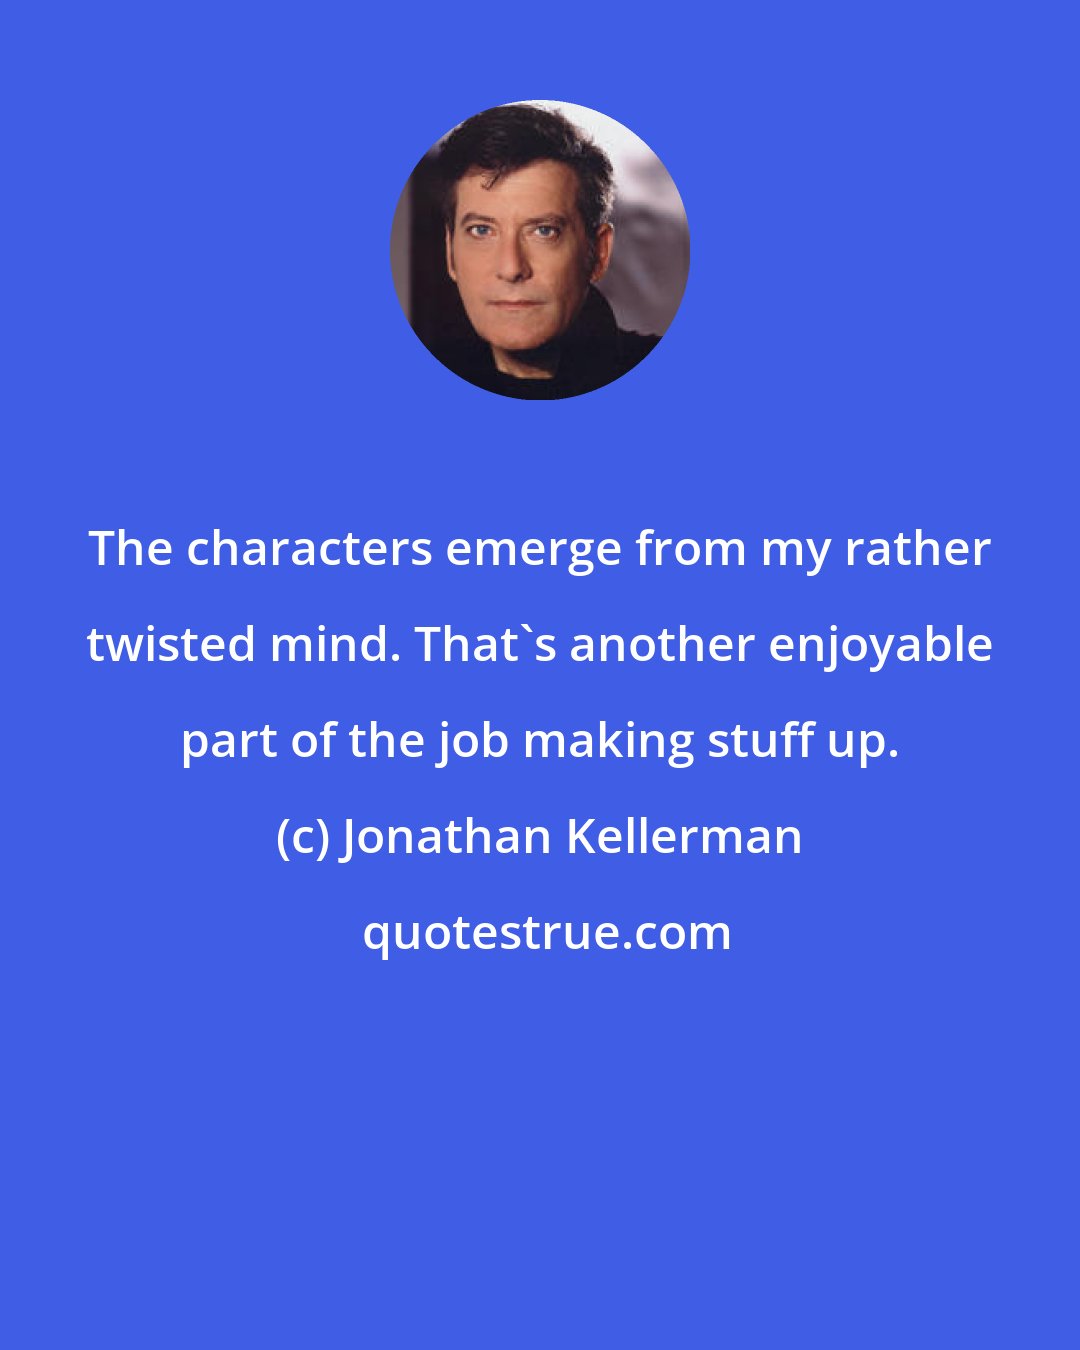 Jonathan Kellerman: The characters emerge from my rather twisted mind. That's another enjoyable part of the job making stuff up.